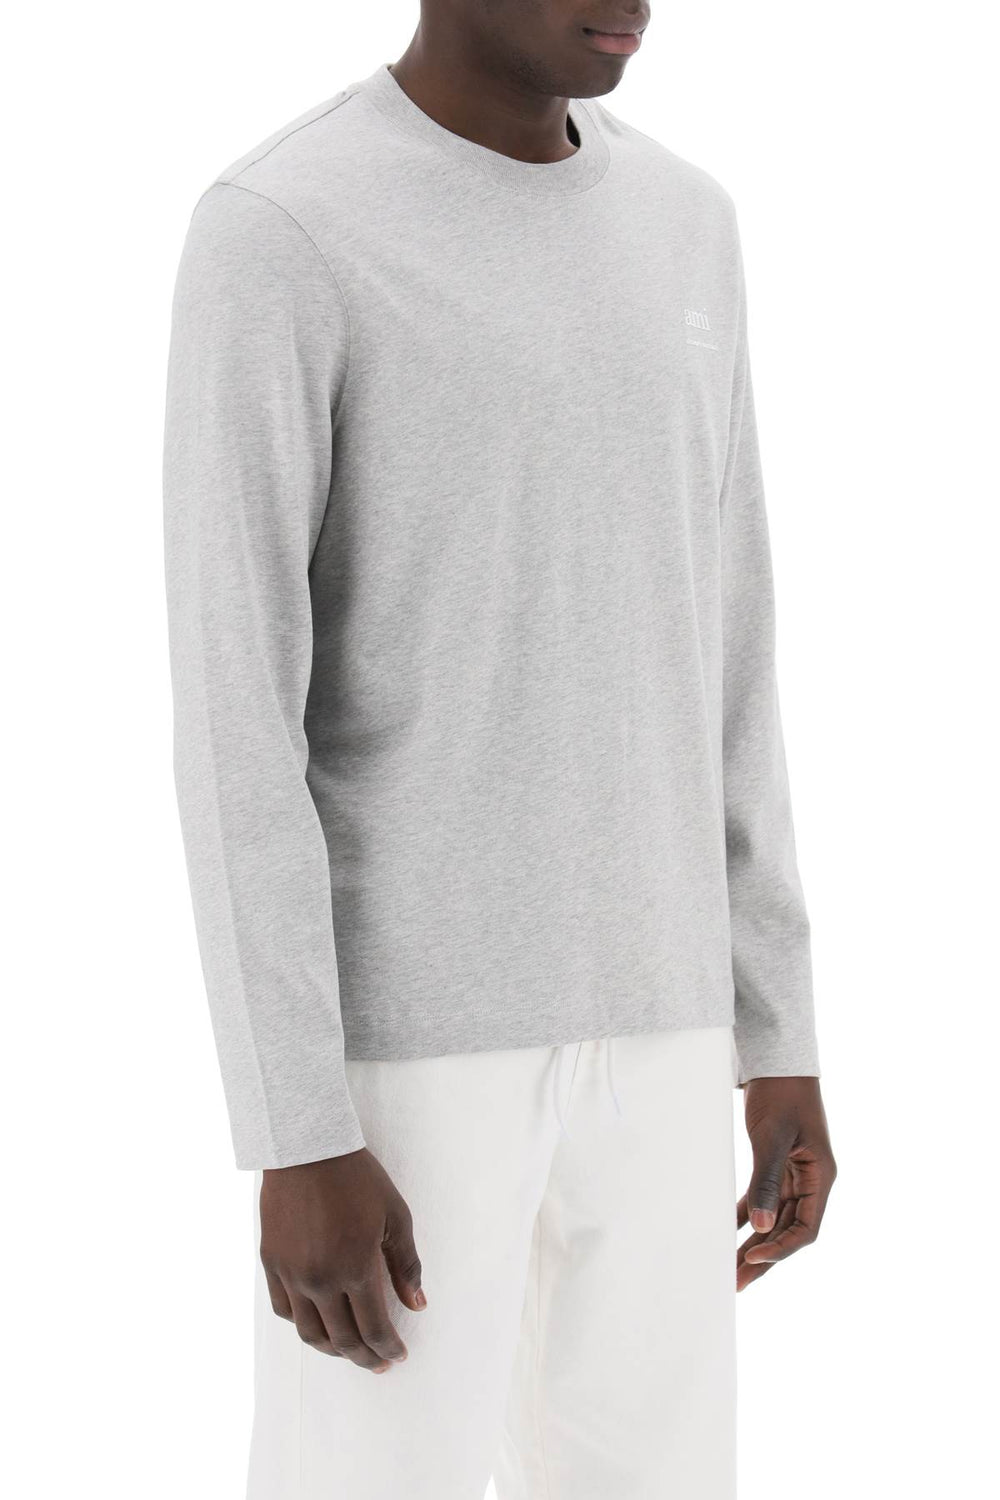 Ami paris long-sleeved cotton t-shirt for-1